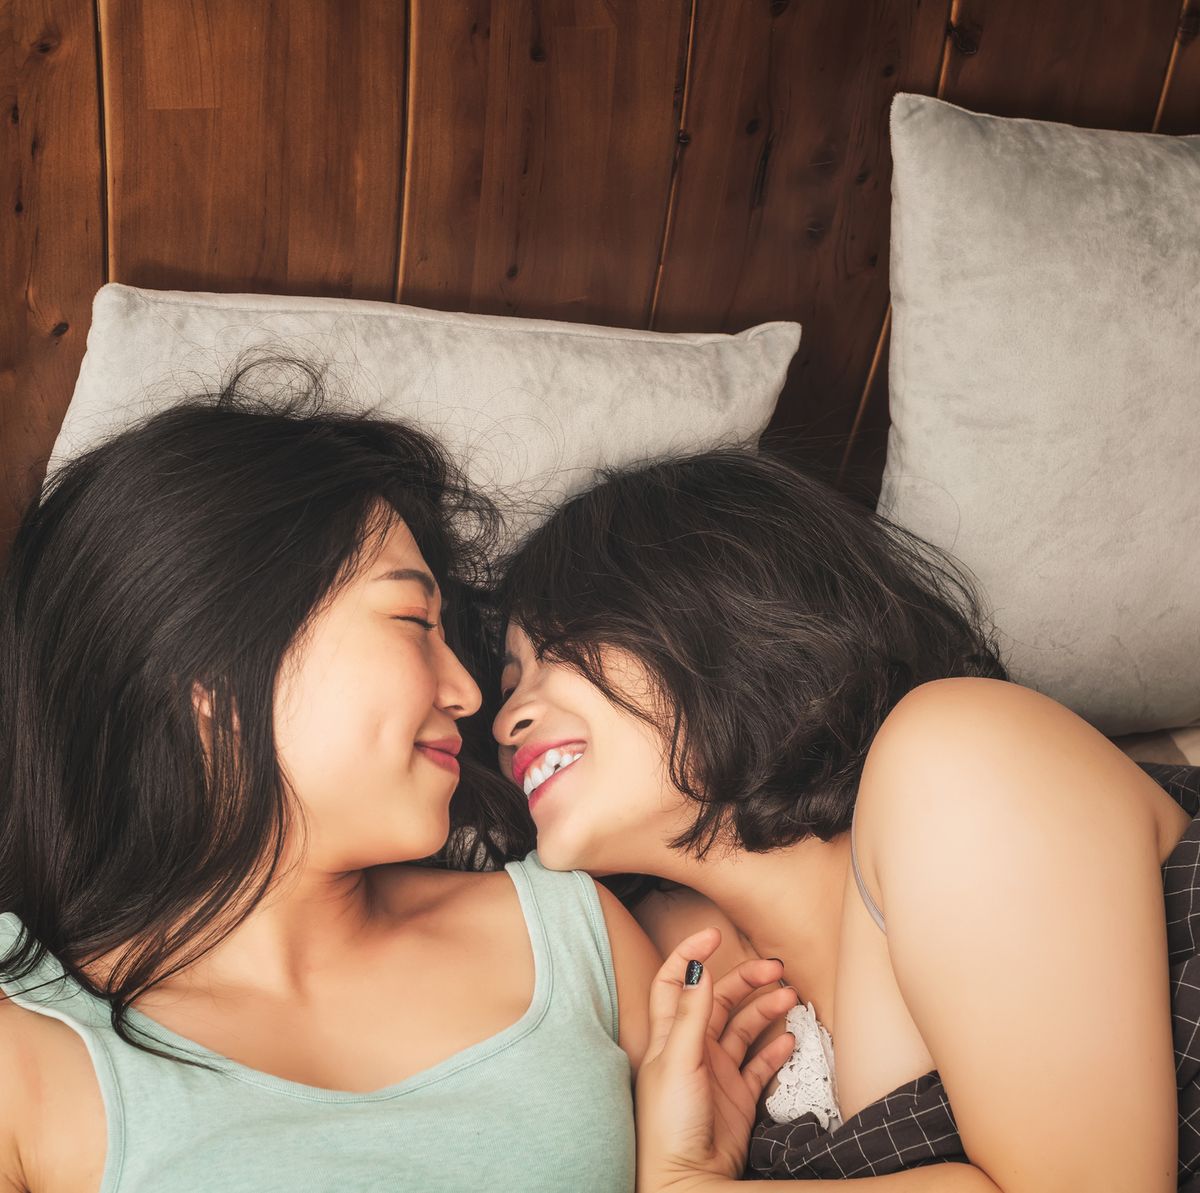 Amateur Forced Lesbian Porn - Am I A Lesbian?' - 15 People Share How They Knew Their Sexuality